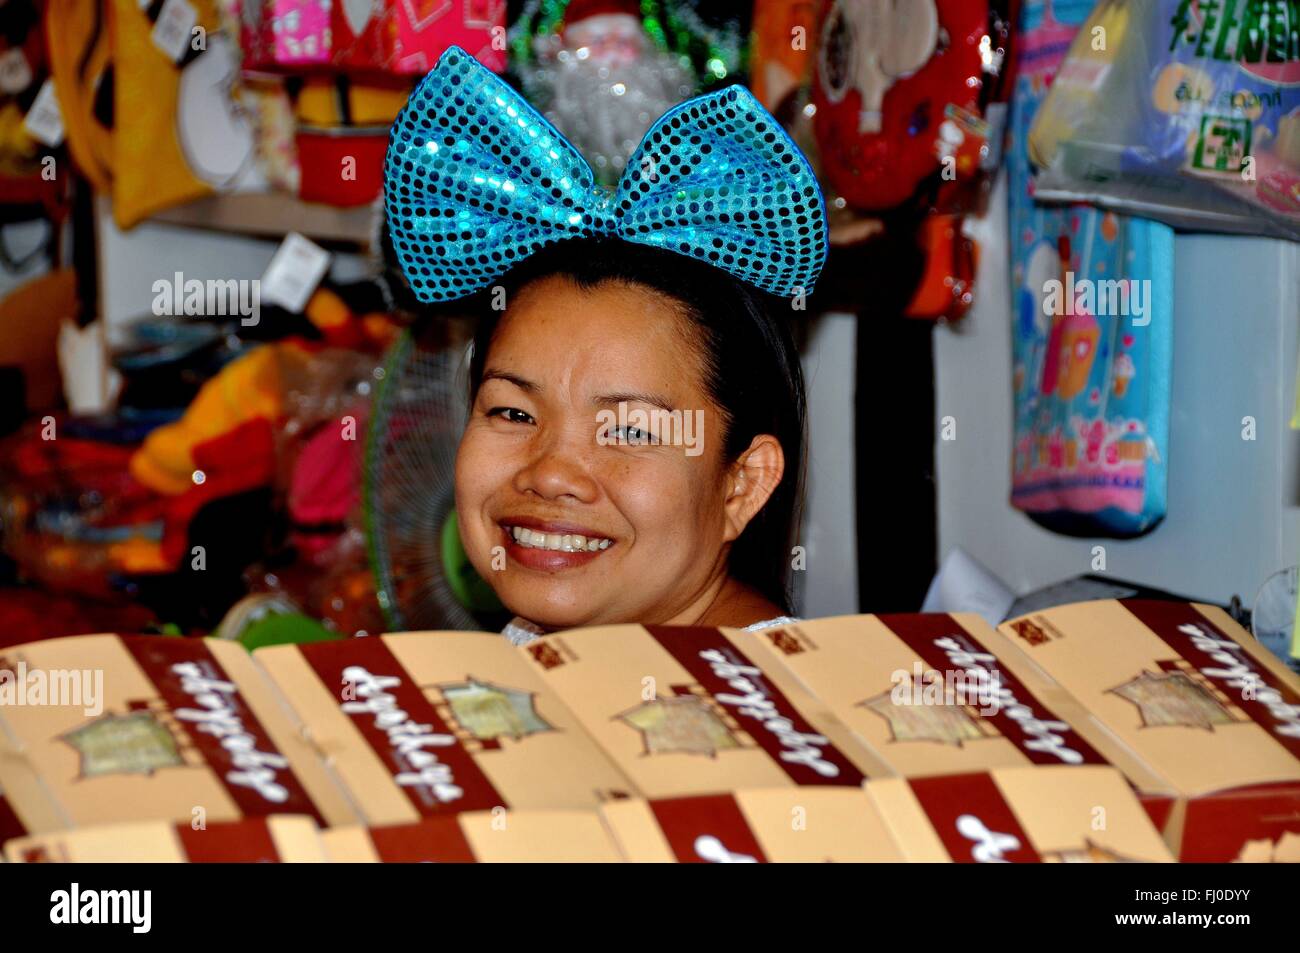 Ayutthaya, Thailand:  Smiling woman with large blue hair bow selling souvenirs at the Ayutthaya Floating Market Stock Photo